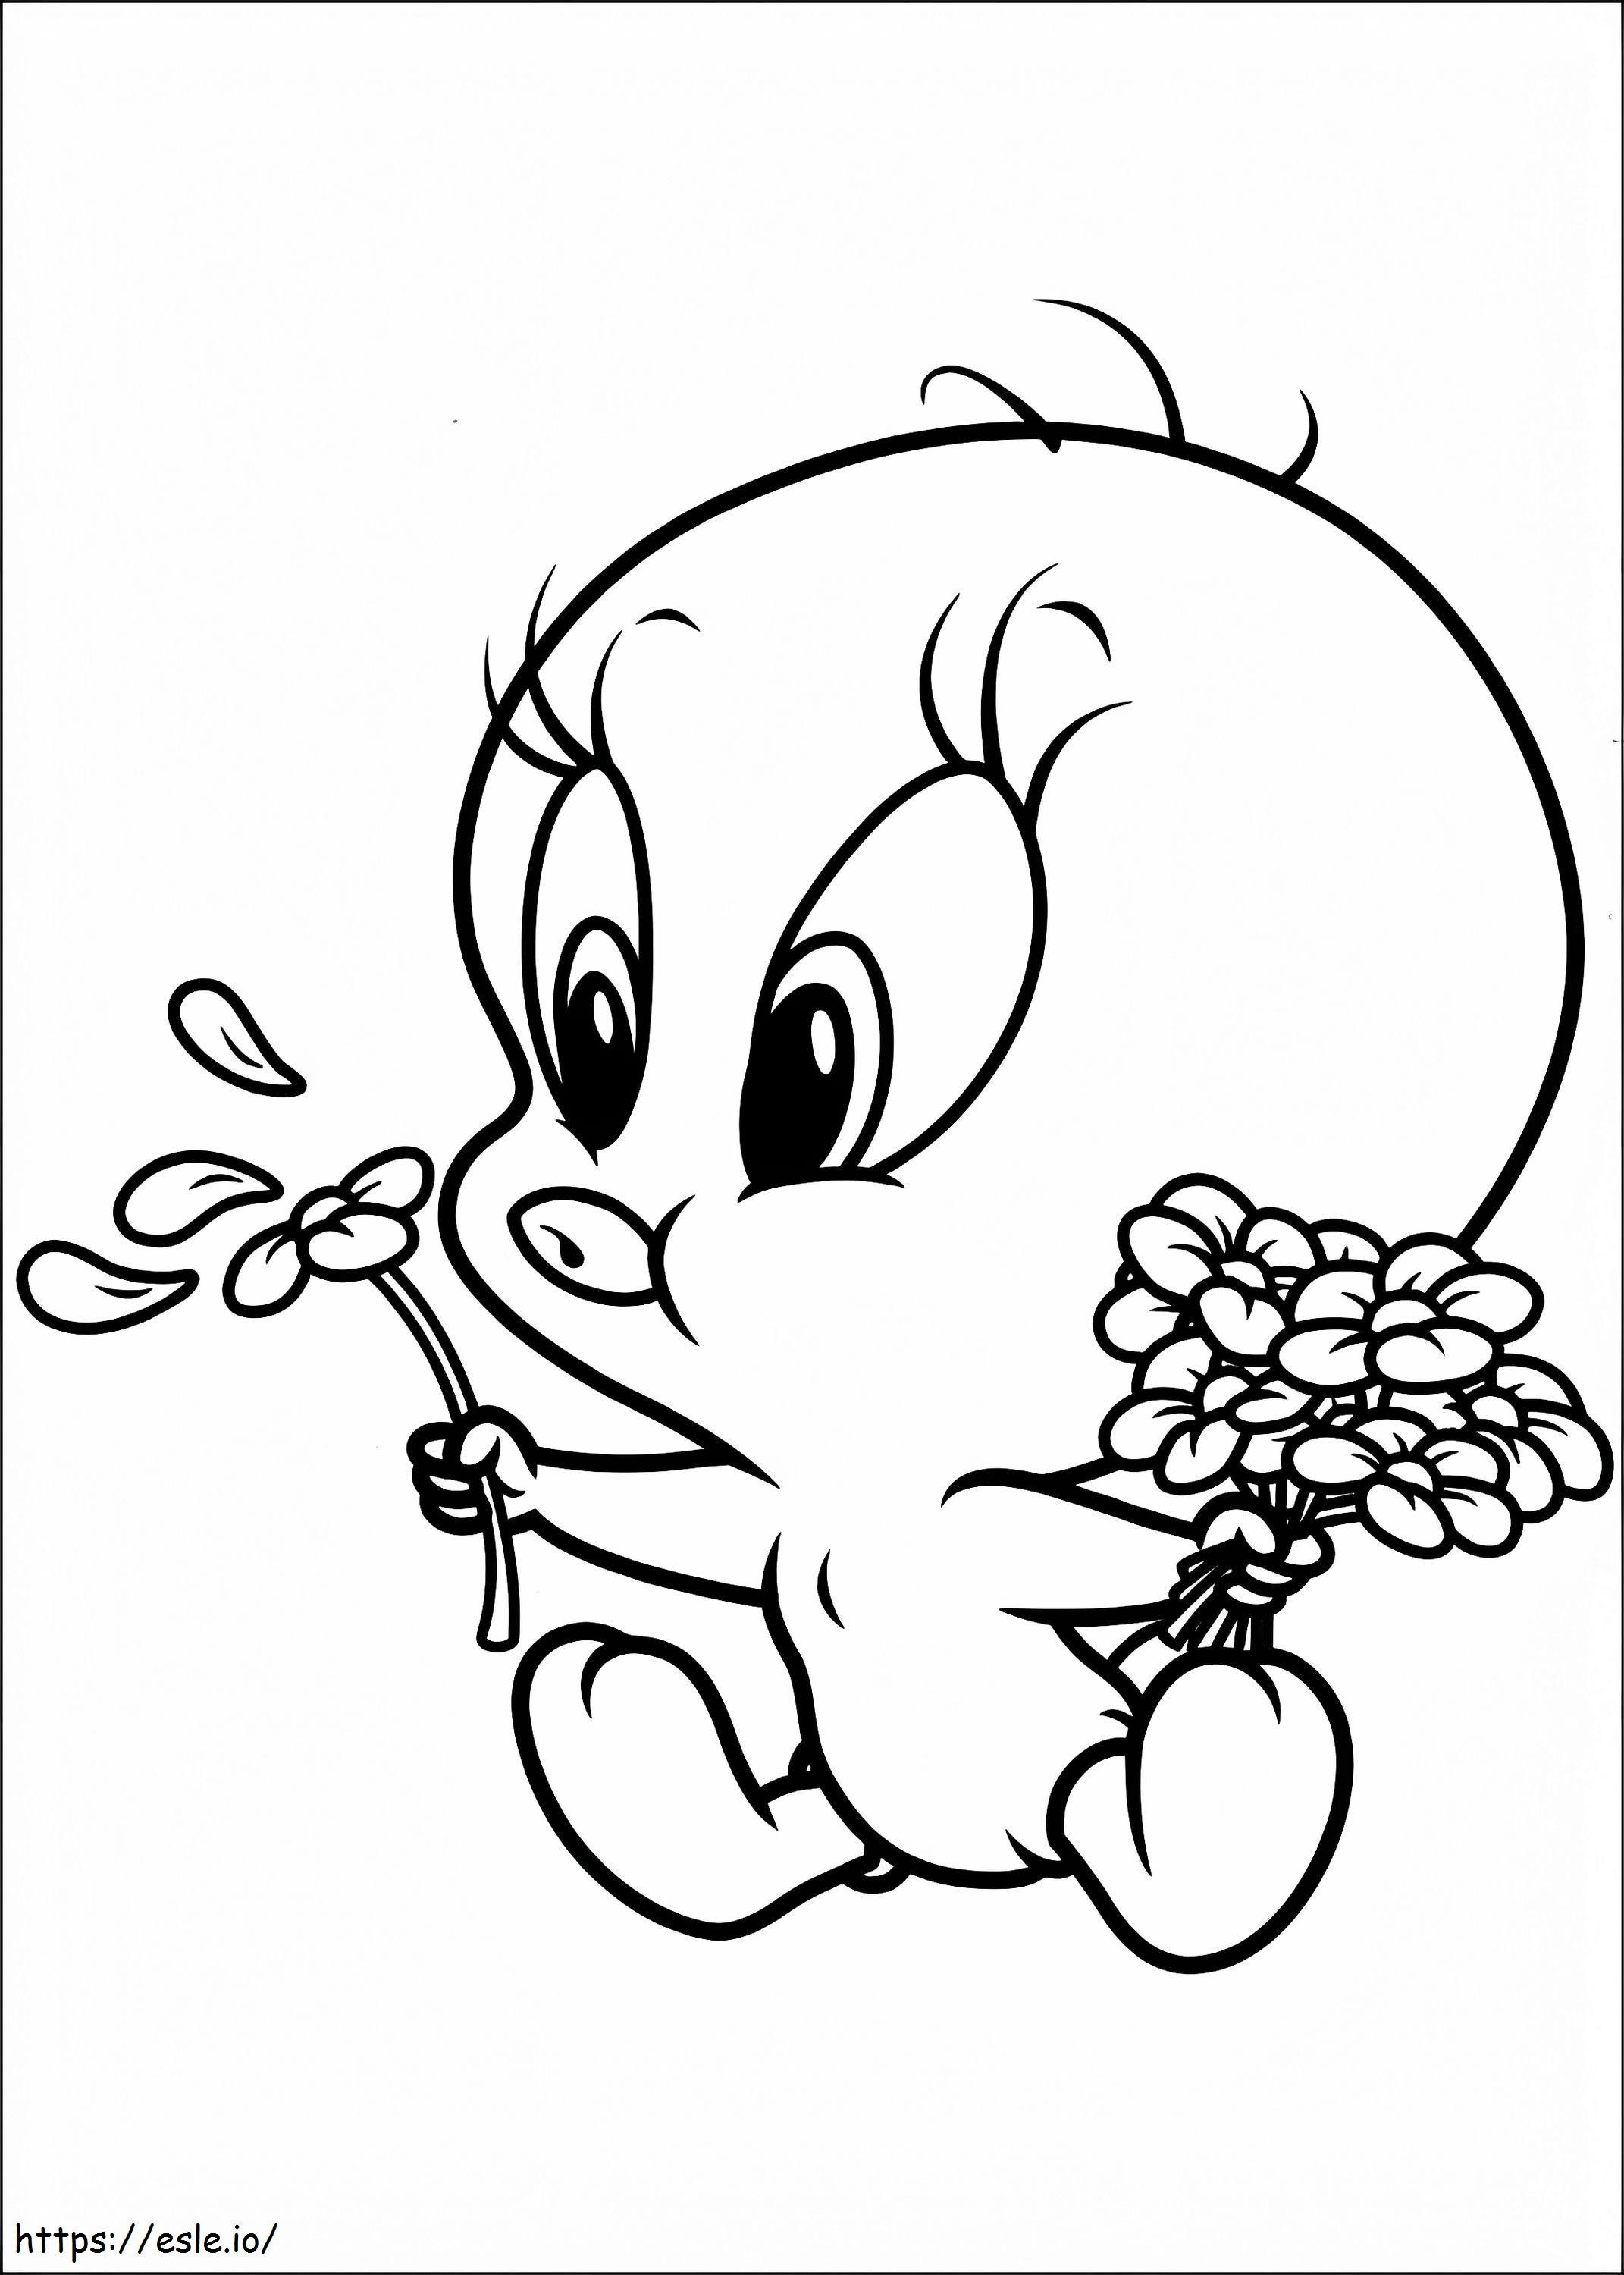 1533779606 Baby Tweety With Flowers A4 coloring page